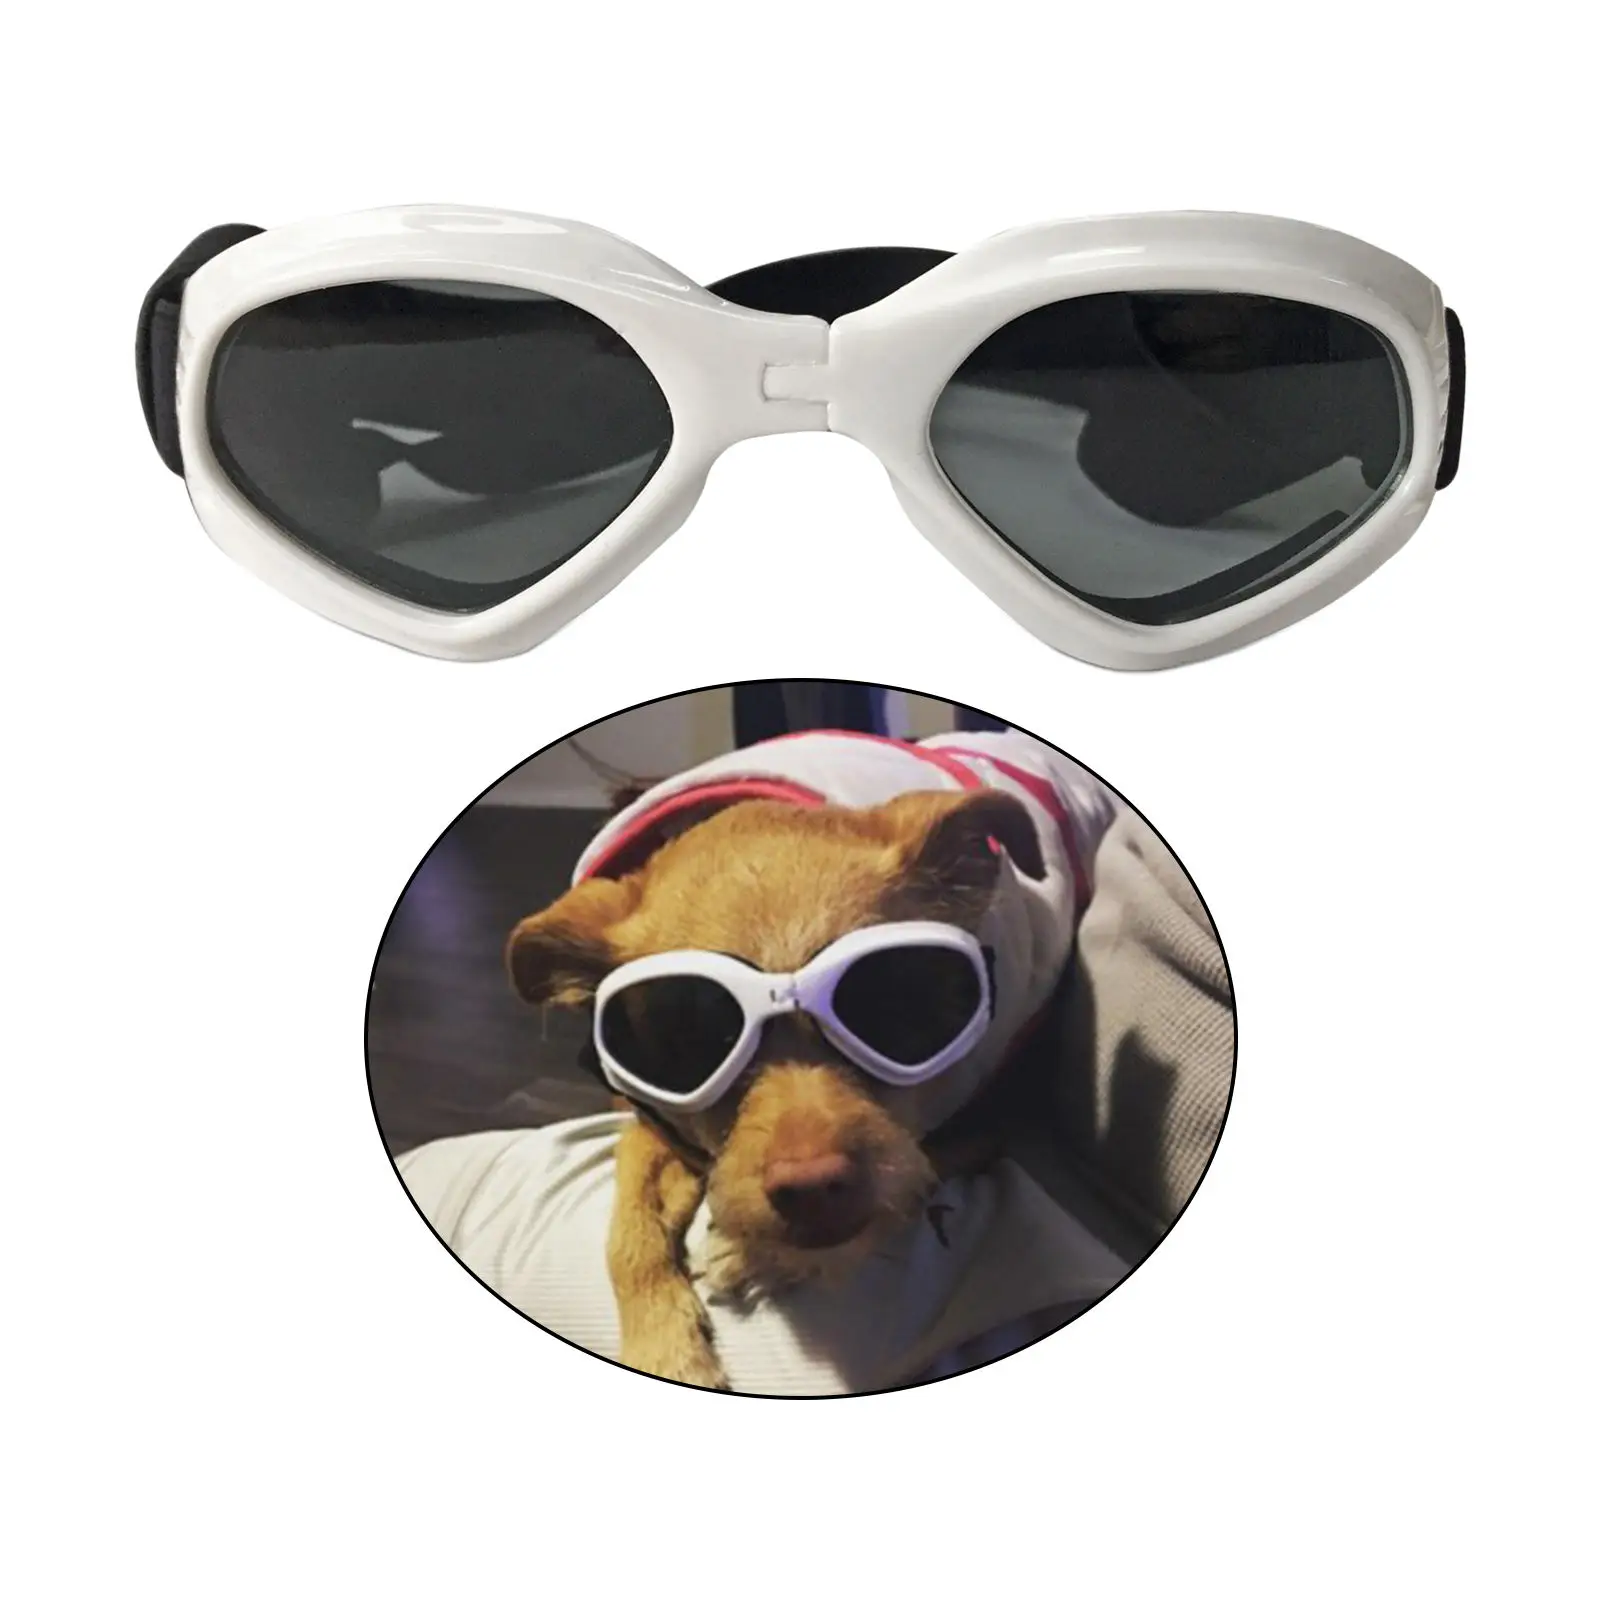 Dog Goggles Protection Eye Foldable Dust Protection Protection Cool Goggles Anti-Breaking Eye Wear Adjustable for Travel Skiing